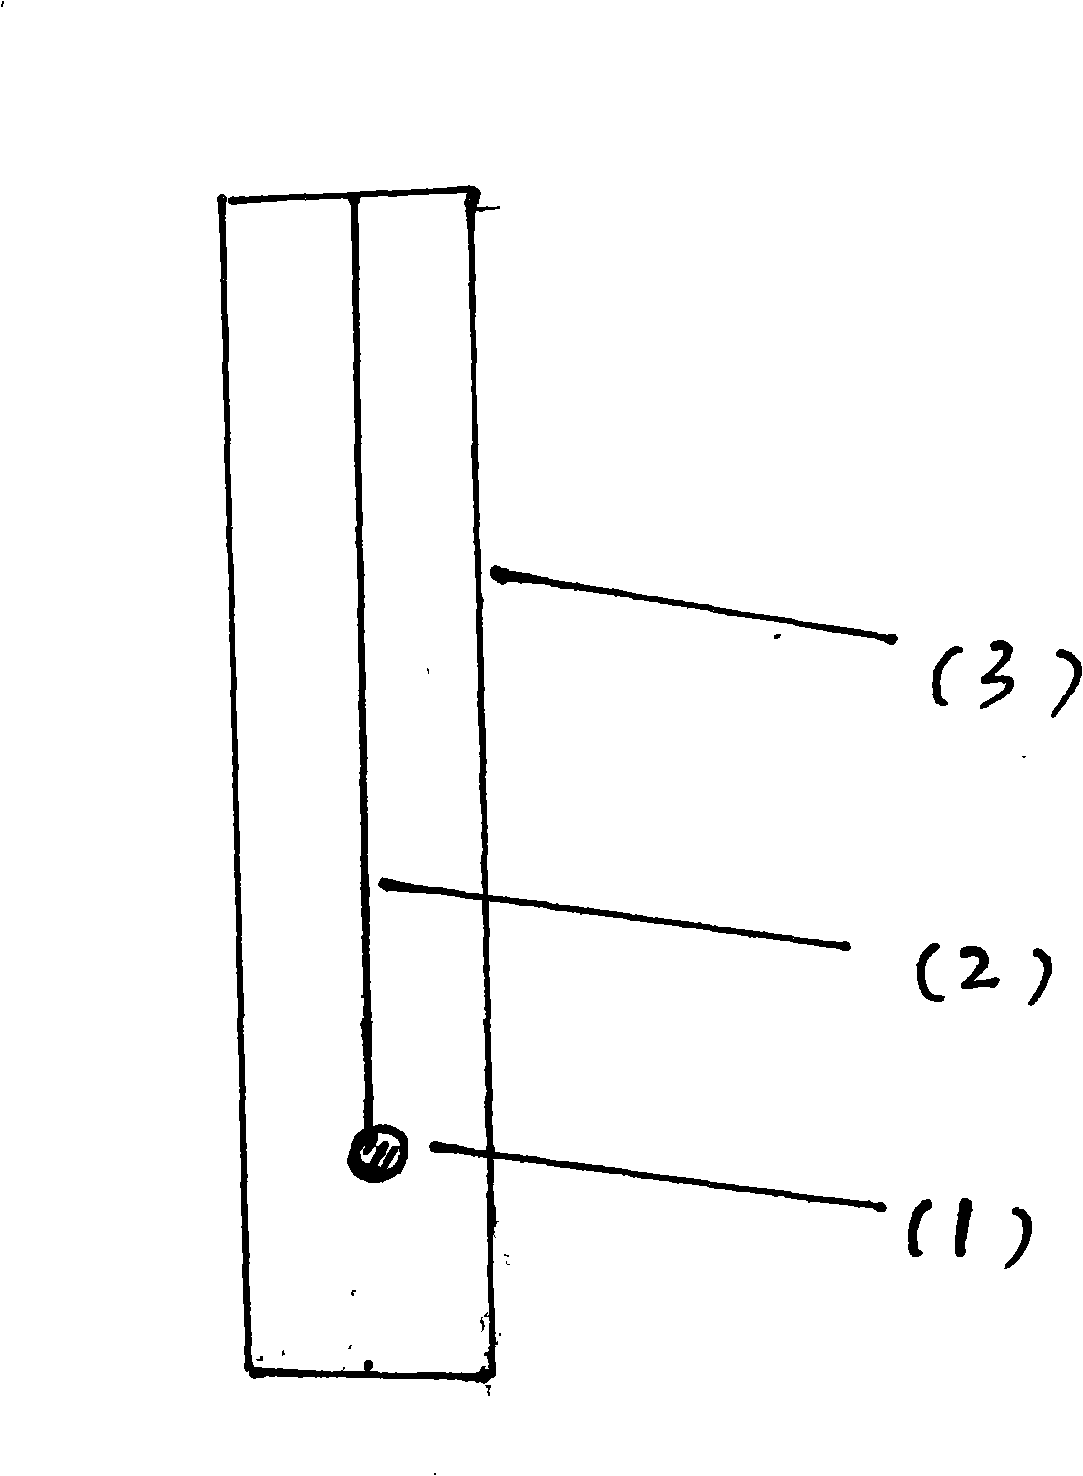 Functional method for monitoring solar electromagnetic wave